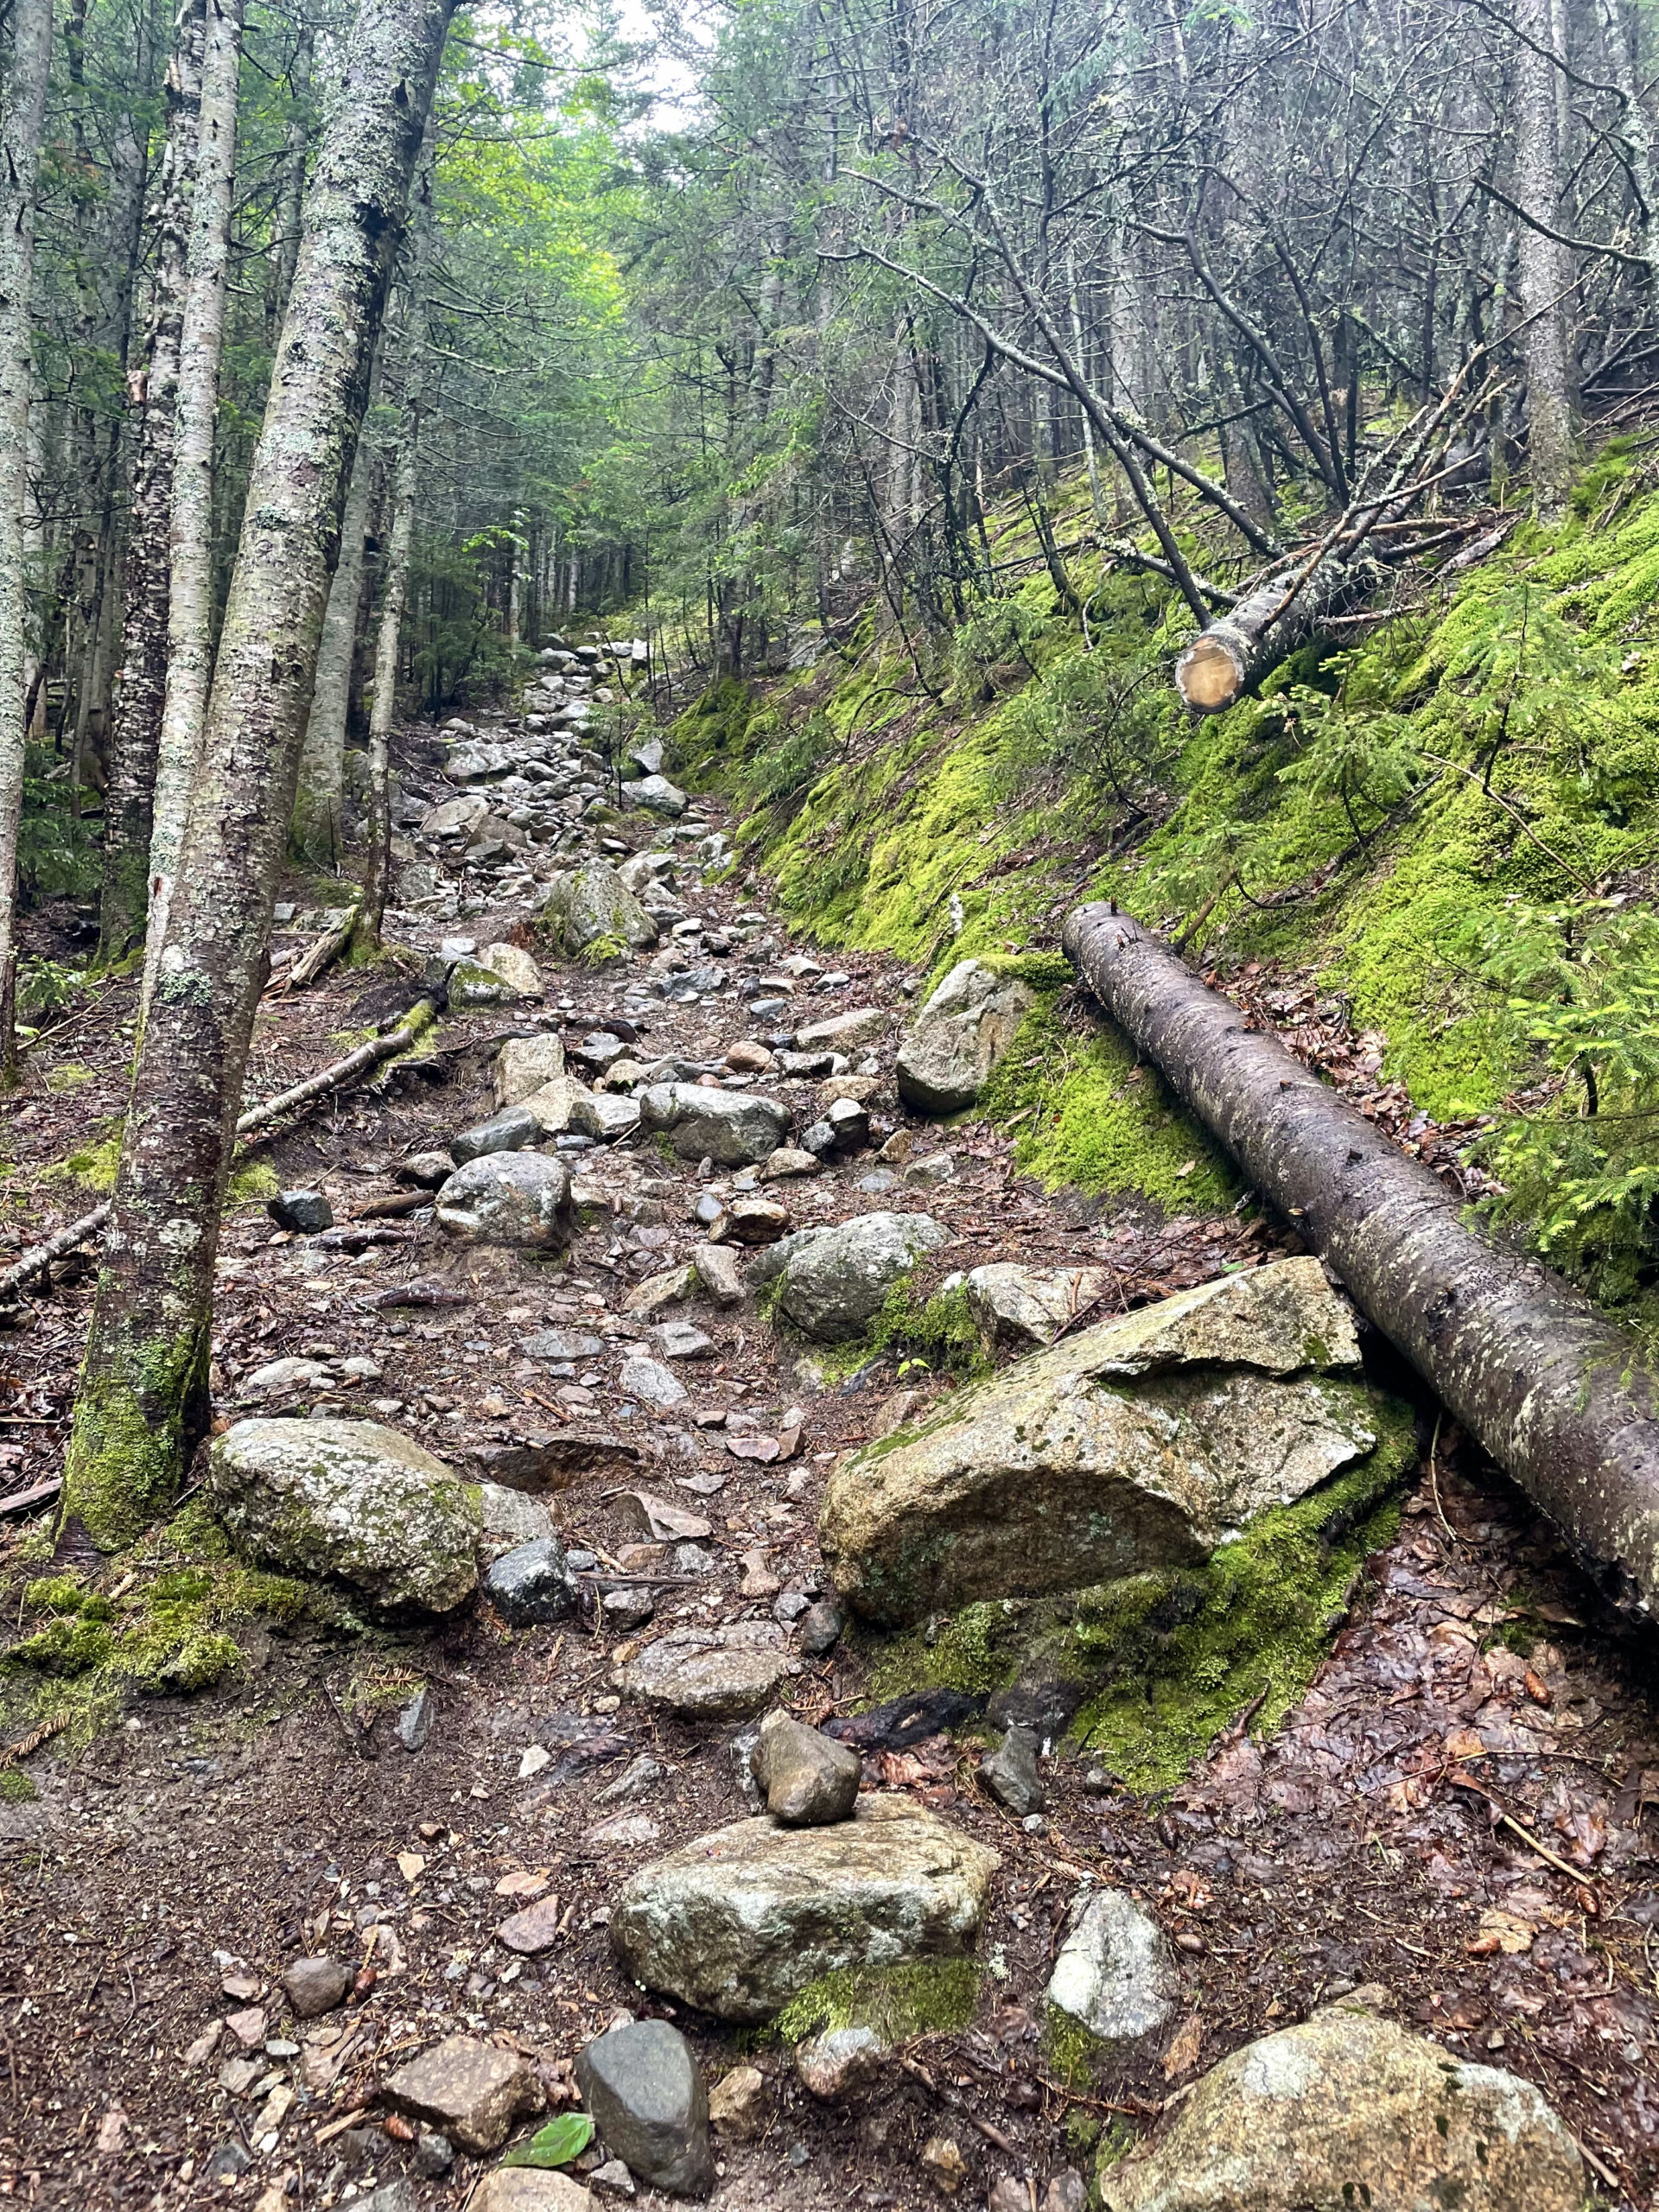 A rocky trail, seen while hiking Mt. Liberty and Mt. Flume on the Flume Slide Trail in the White Mountain National Forest, New Hampshire